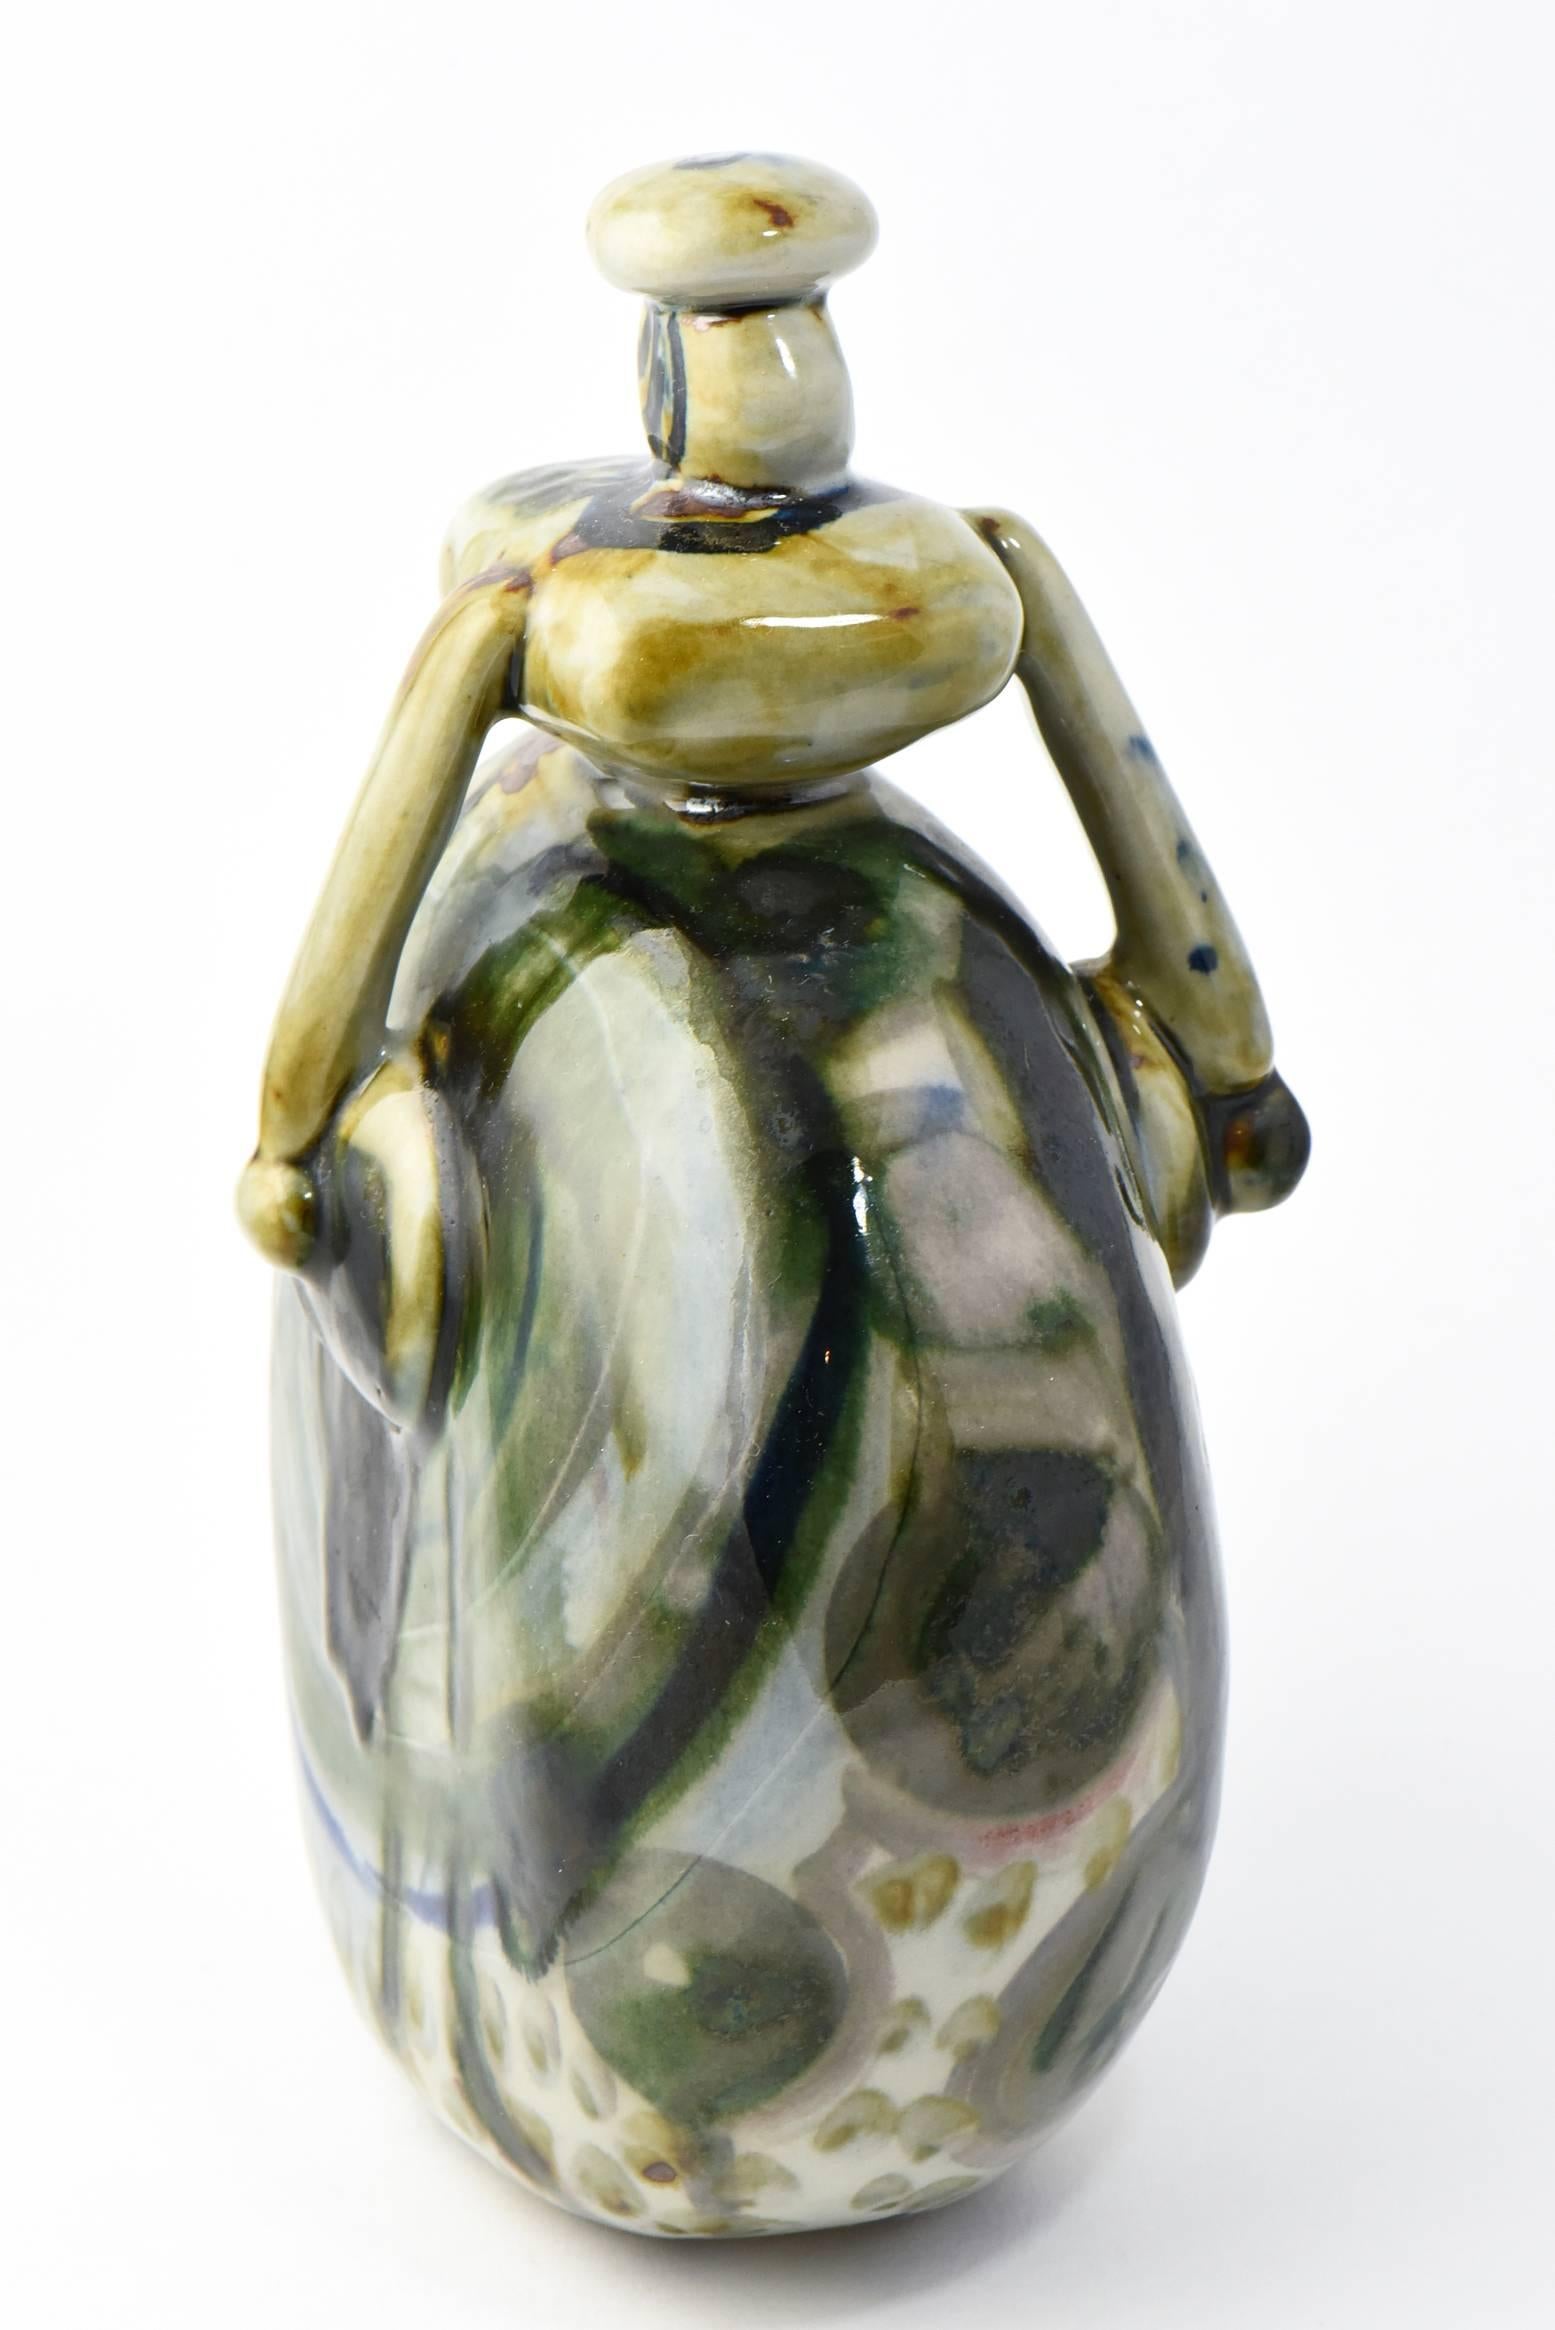 Ceramic figurine in the shape of a woman with green, blue, white and beige mottled glaze. Signed on base, but not fully legible.